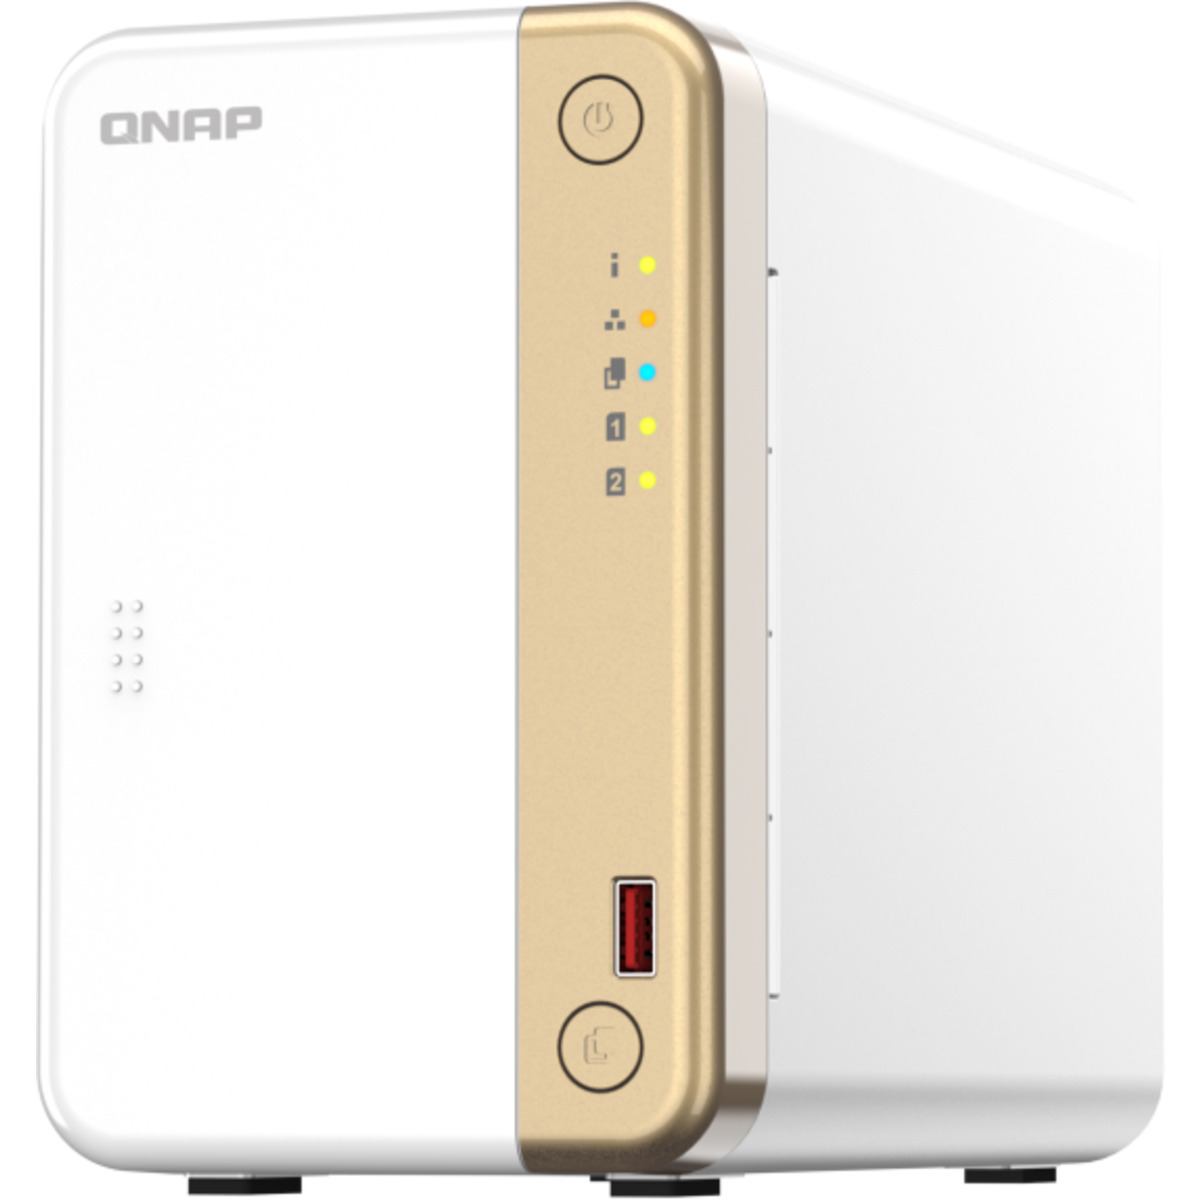 QNAP TS-262 28tb 2-Bay Desktop Personal / Basic Home / Small Office NAS - Network Attached Storage Device 2x14tb Seagate IronWolf Pro ST14000NT001 3.5 7200rpm SATA 6Gb/s HDD NAS Class Drives Installed - Burn-In Tested TS-262